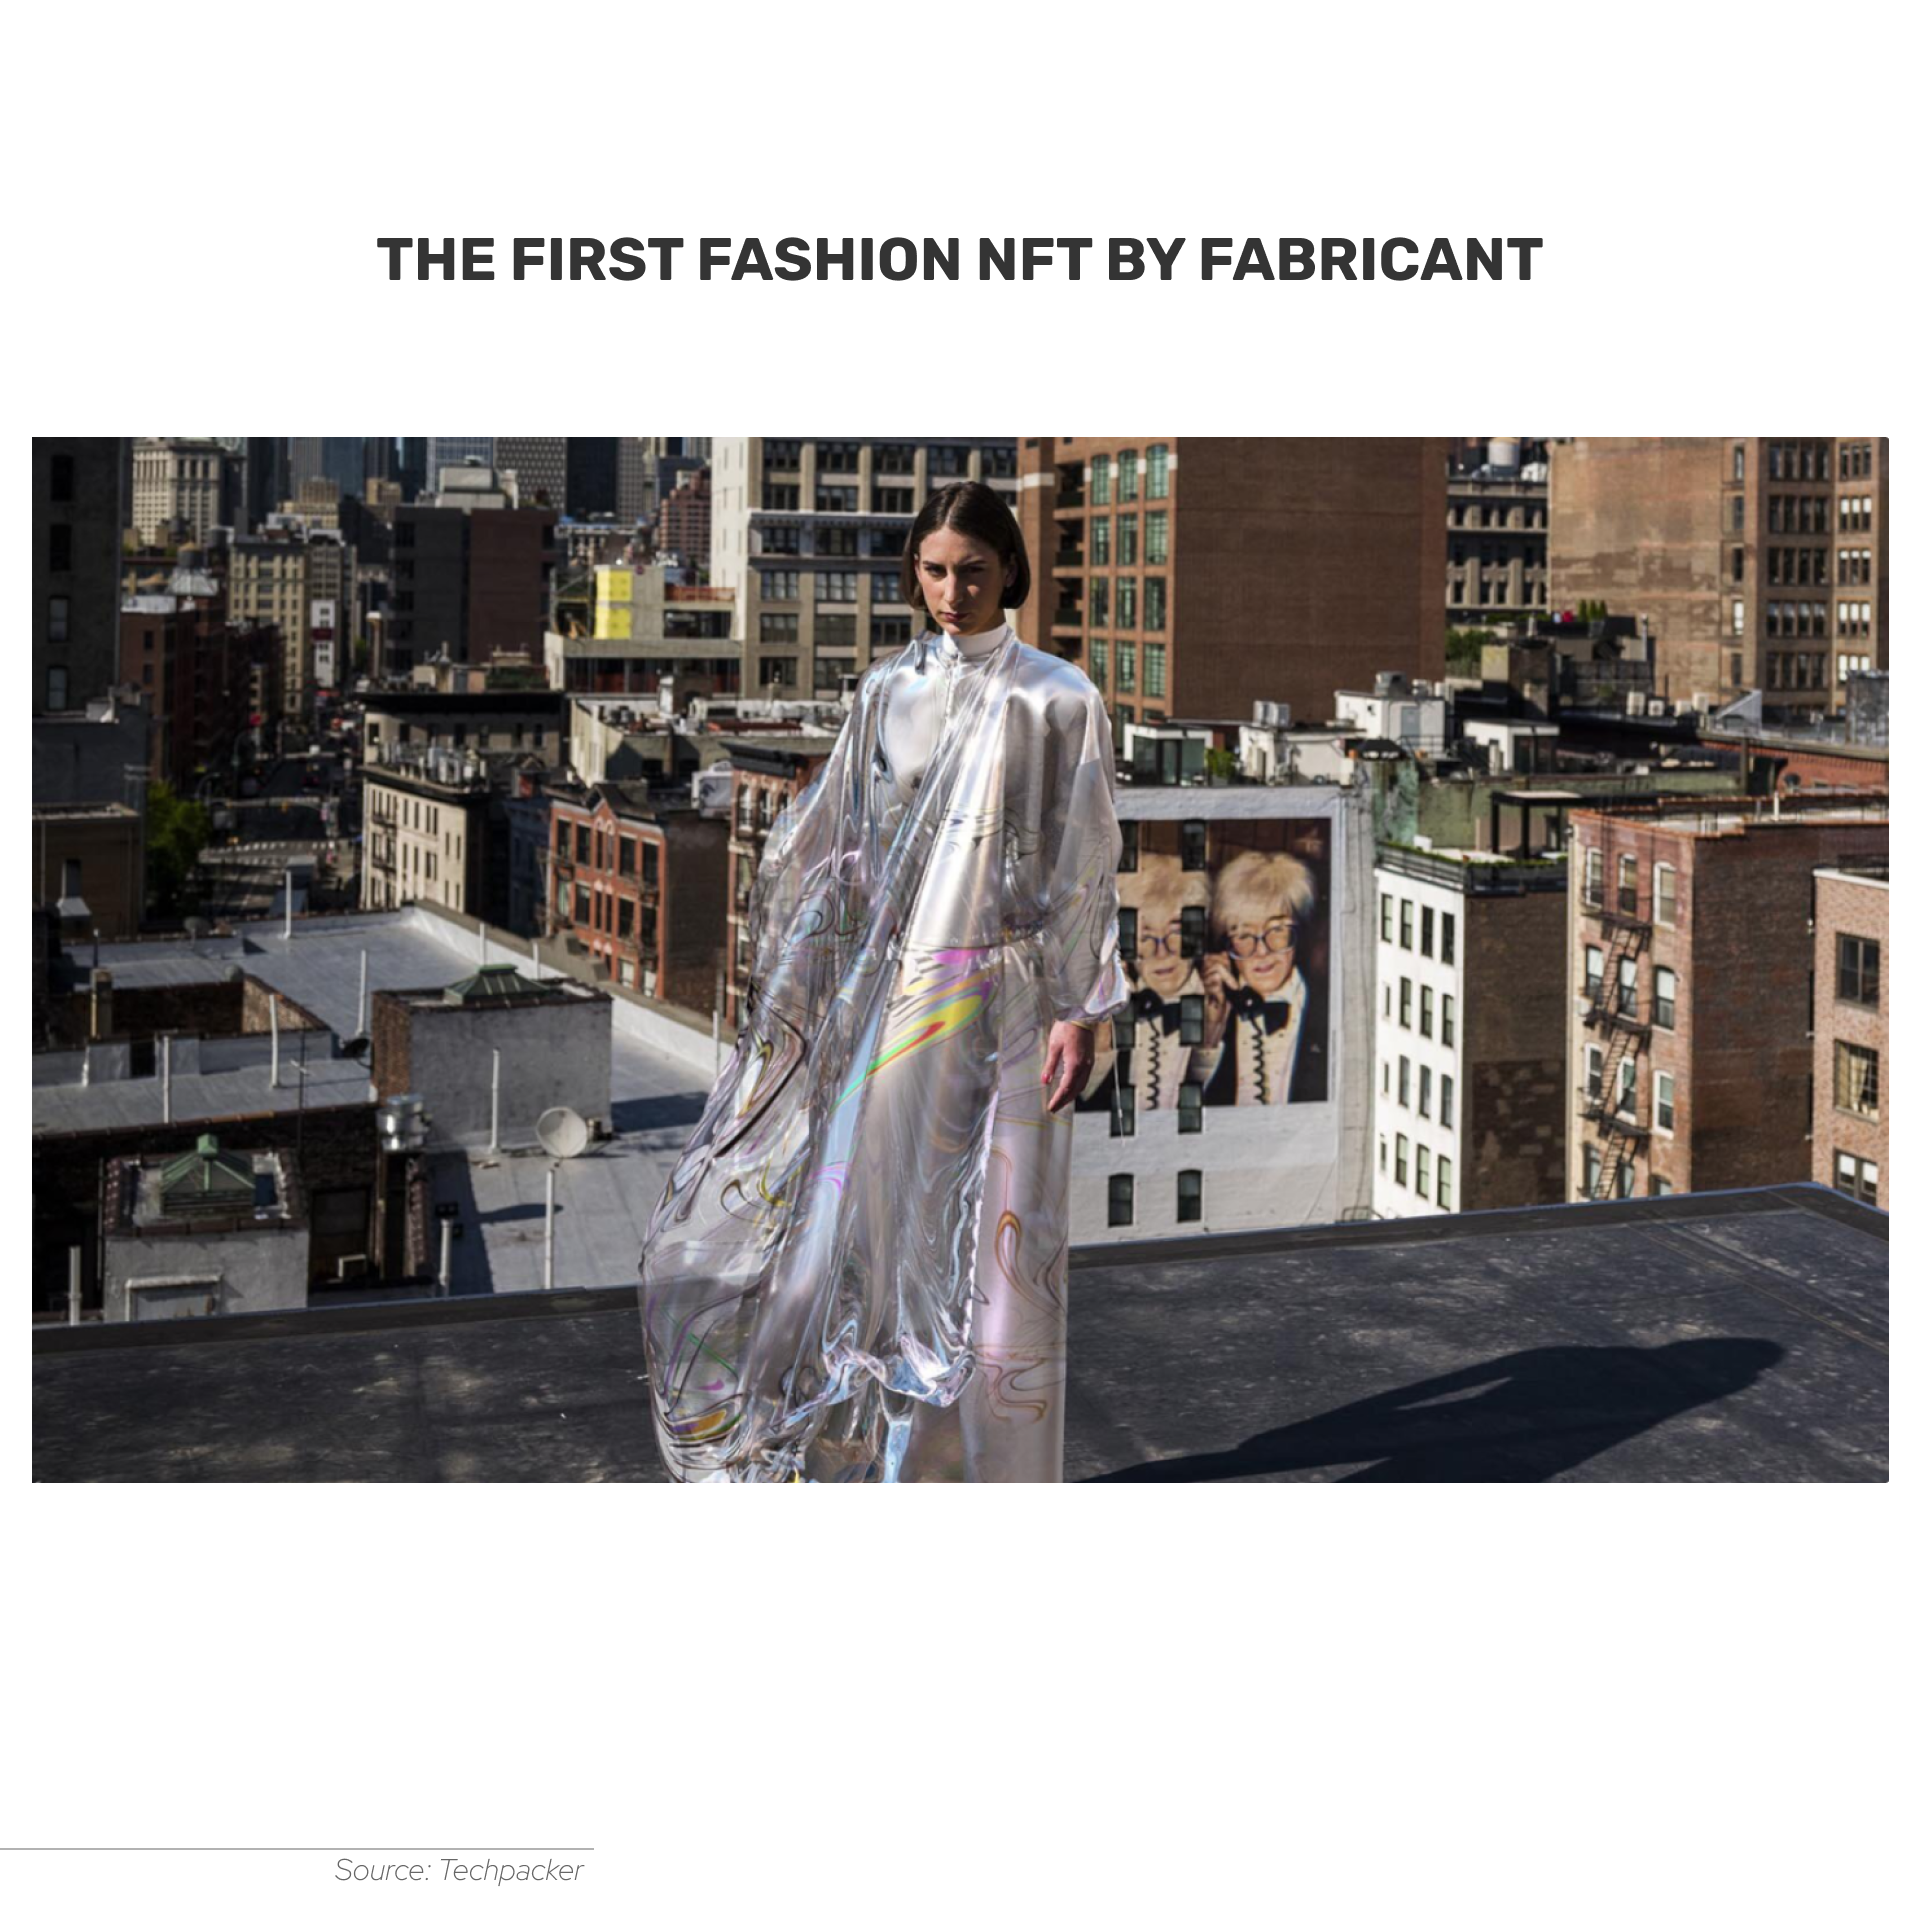 The first fashion NFT created by Fabricant was sold for $9,500.